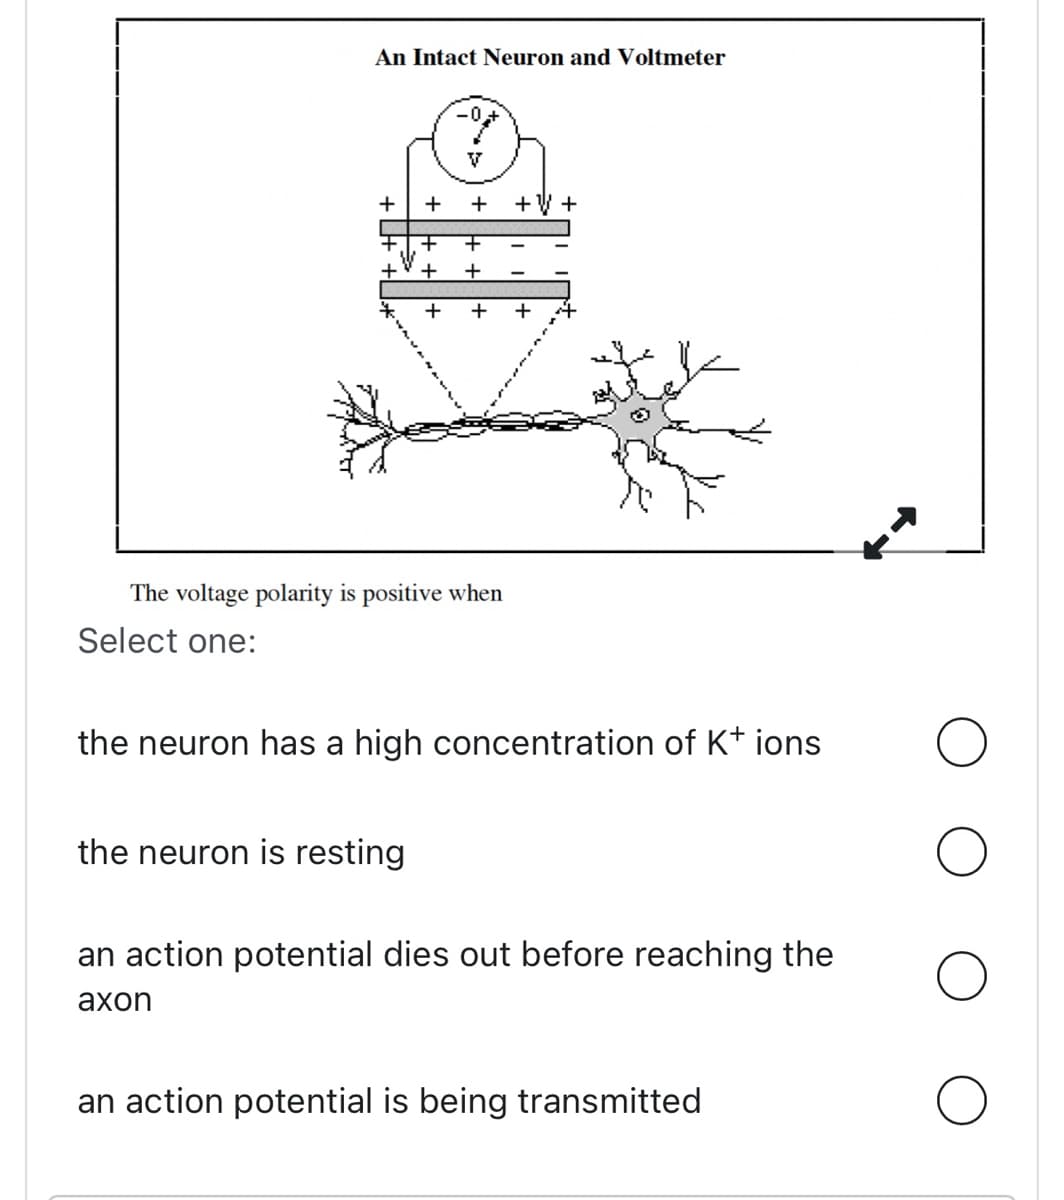 An Intact Neuron and Voltmeter
Select one:
+H
-0,+
V
the neuron is resting
+ + ++
The voltage polarity is positive when
+ +
+
+
+ +
the neuron has a high concentration of K+ ions
an action potential dies out before reaching the
axon
an action potential is being transmitted